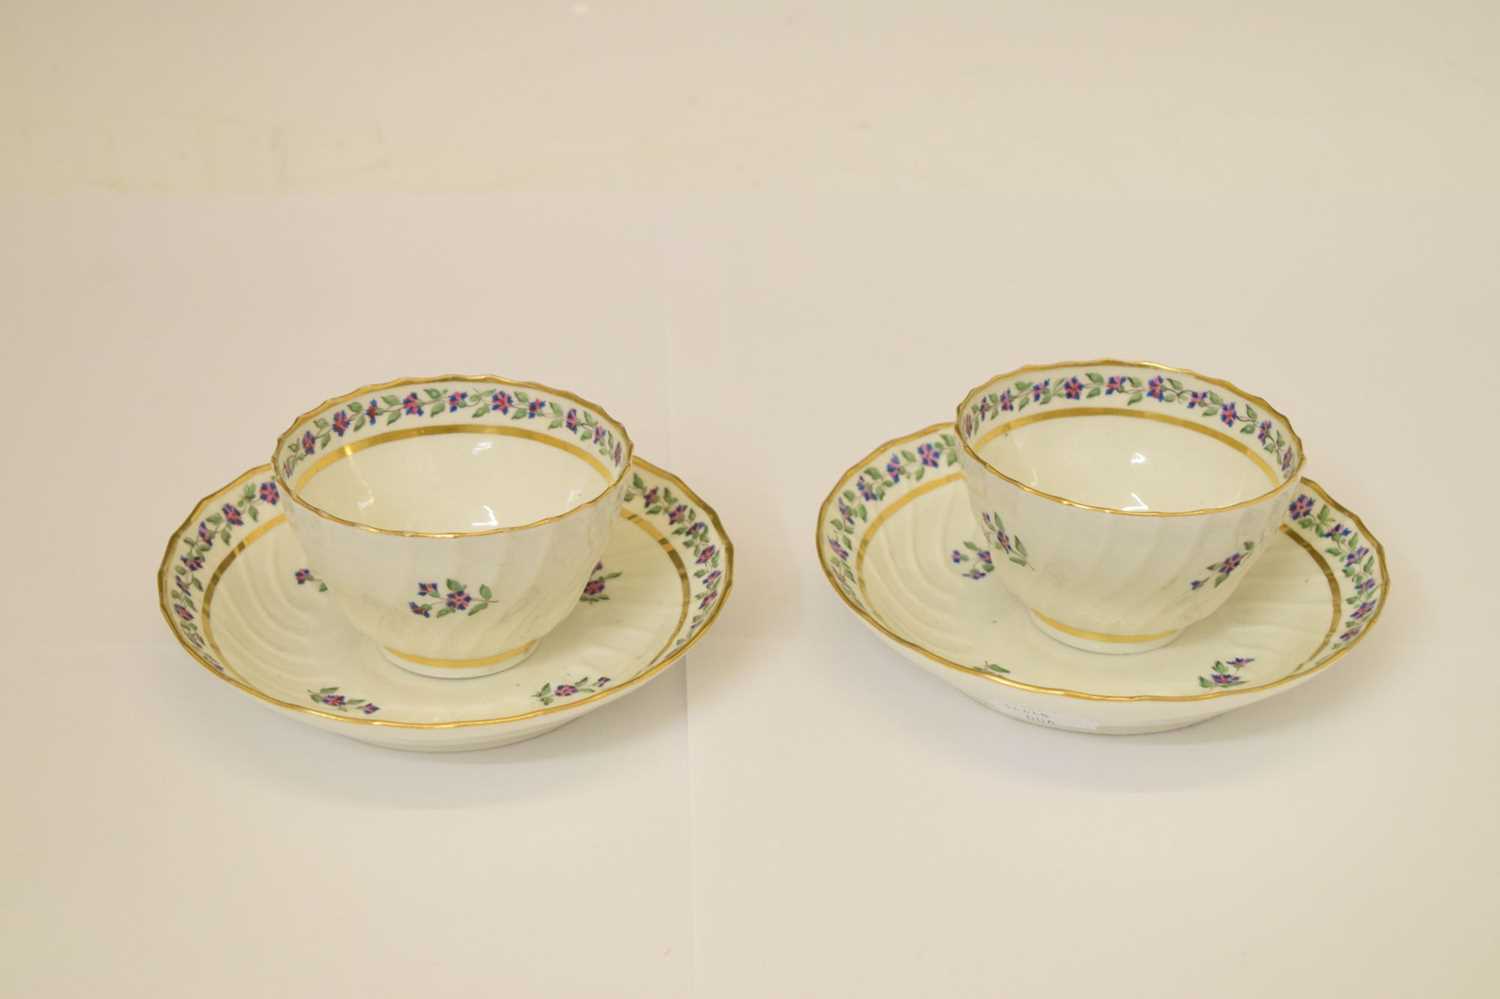 Pair of late 18th century New Hall-style spirally-fluted tea bowls and saucers - Image 4 of 10